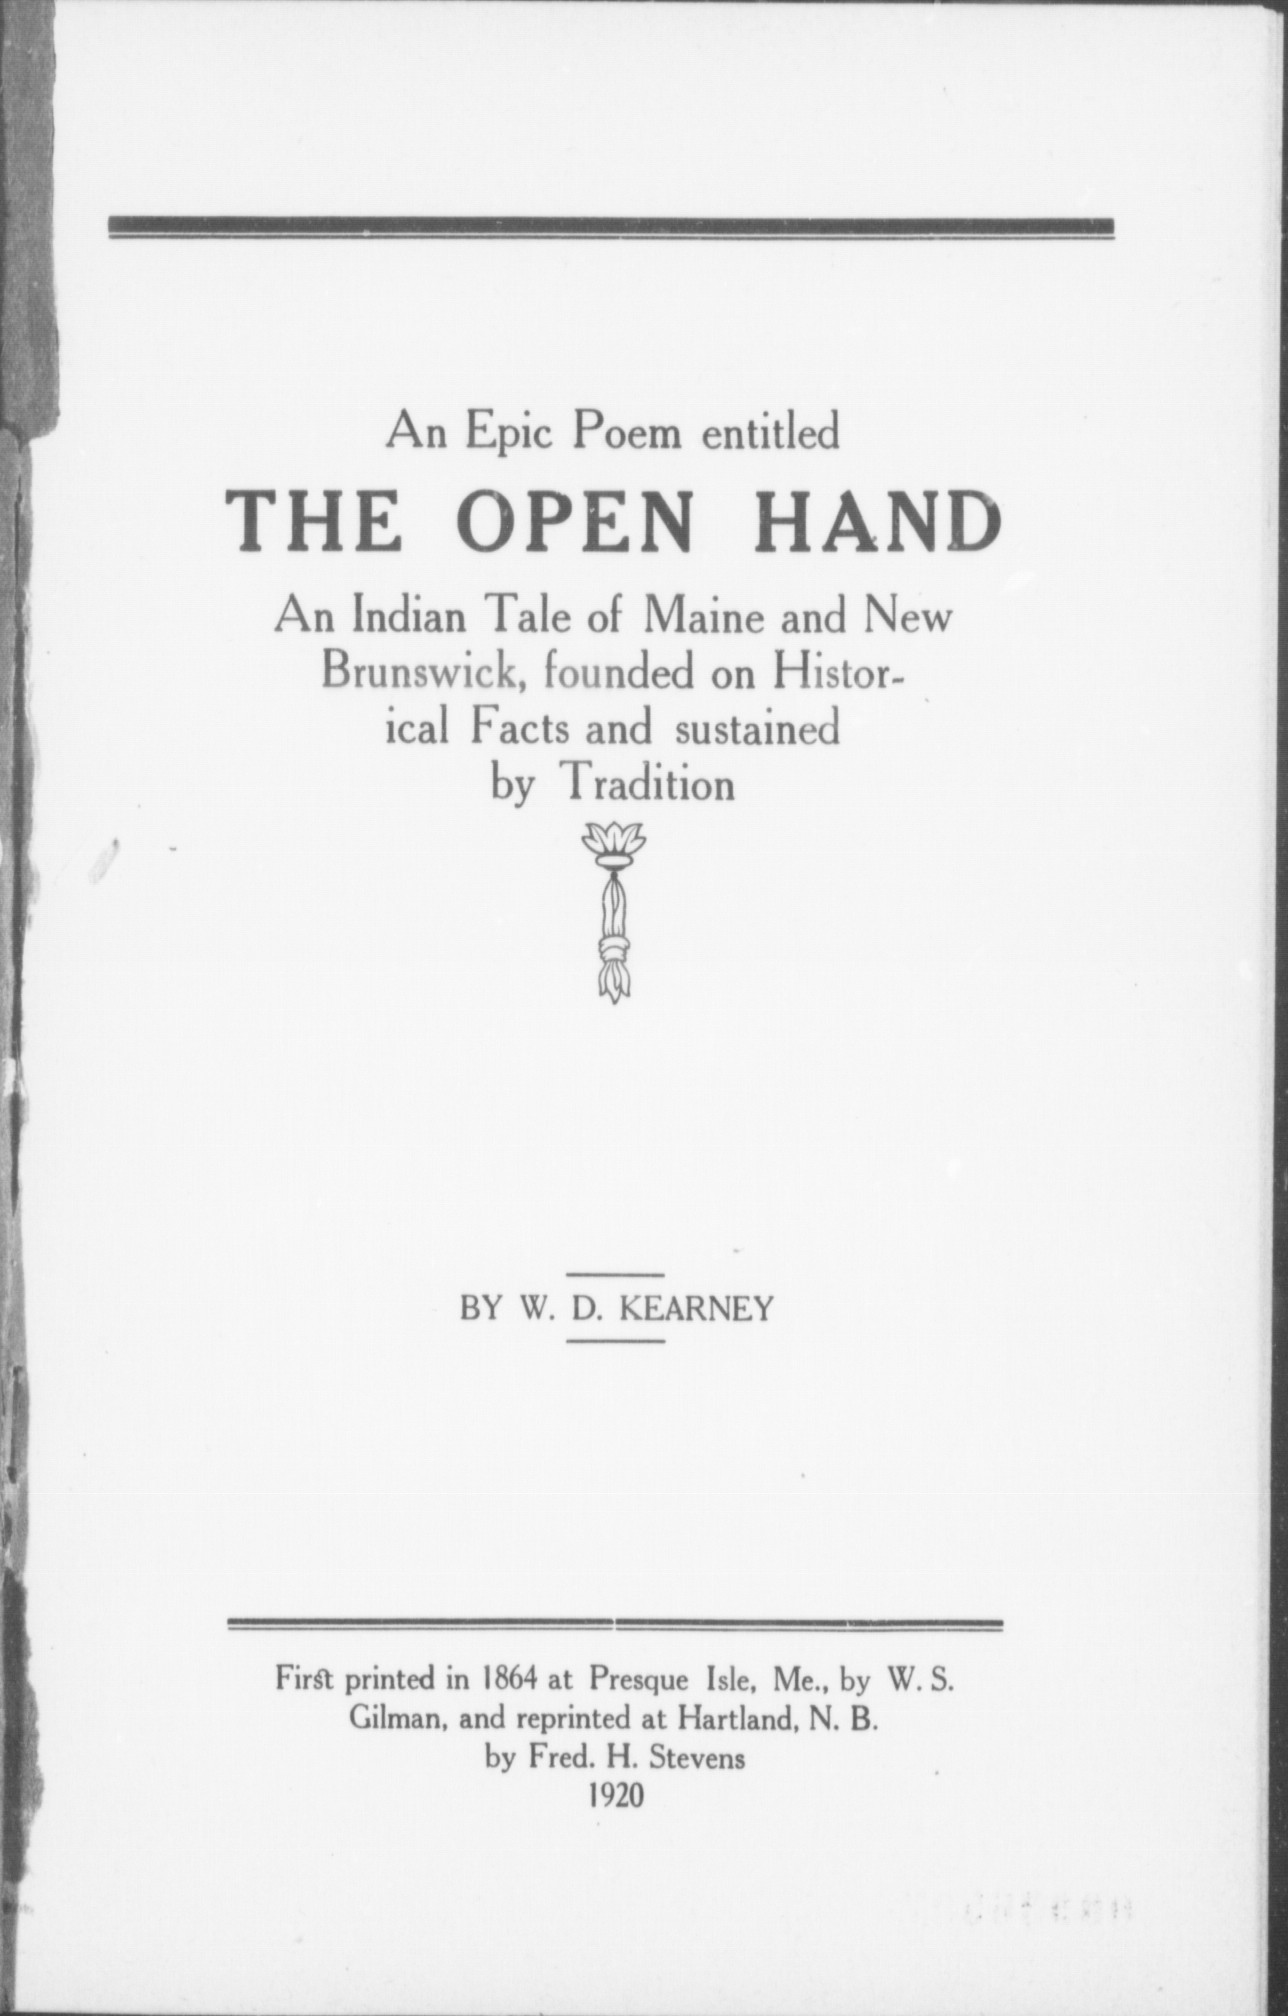 Frontispiece of "An epic poem, entitled The open Hand" by W.D. Kearney